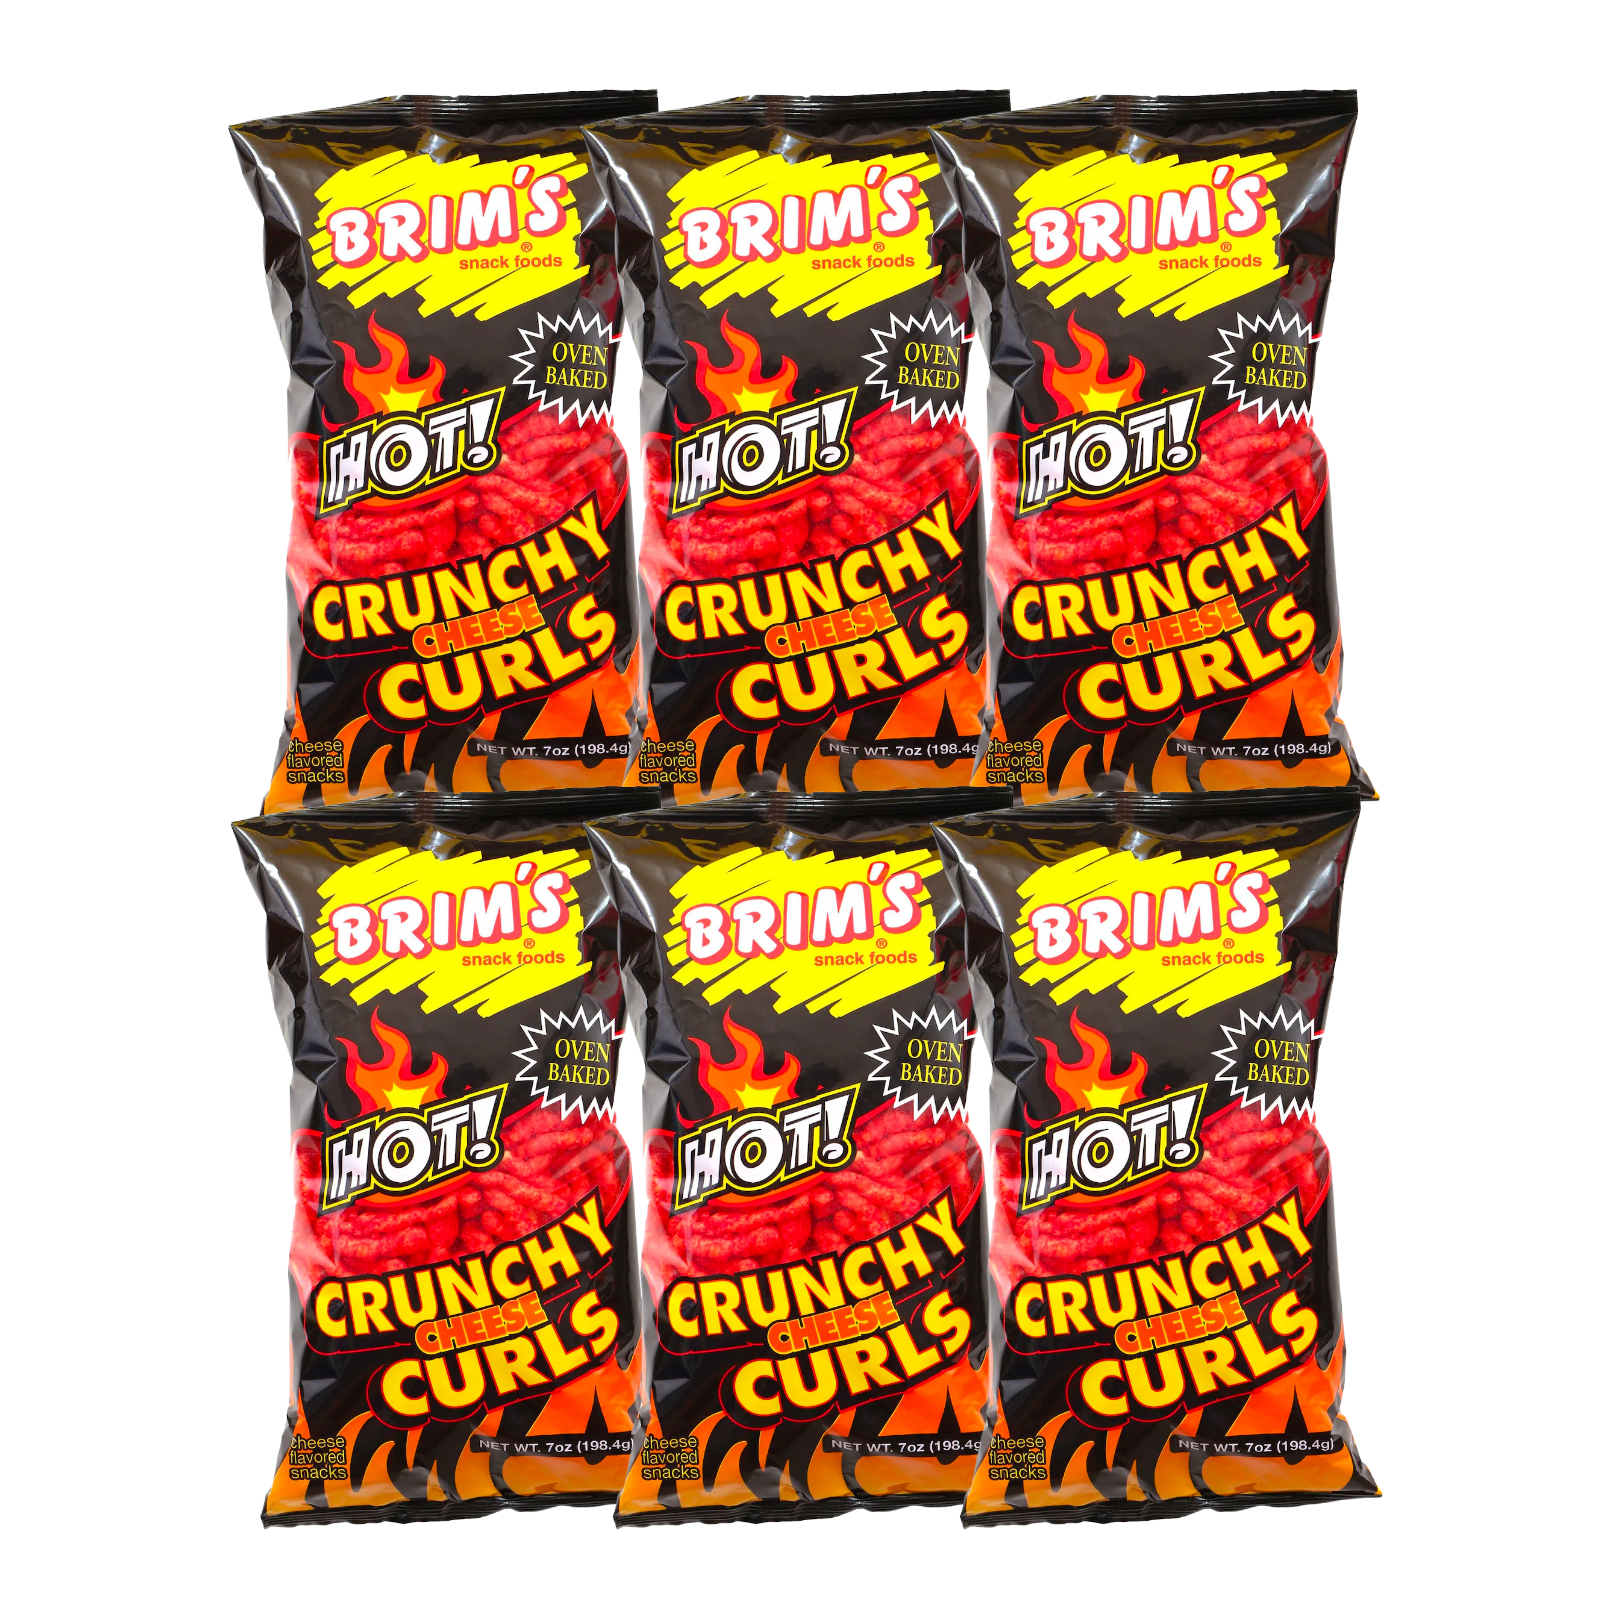 Brim's Crunchy Hot Cheese Curls (7 oz., 6-pack) - image 1 of 6